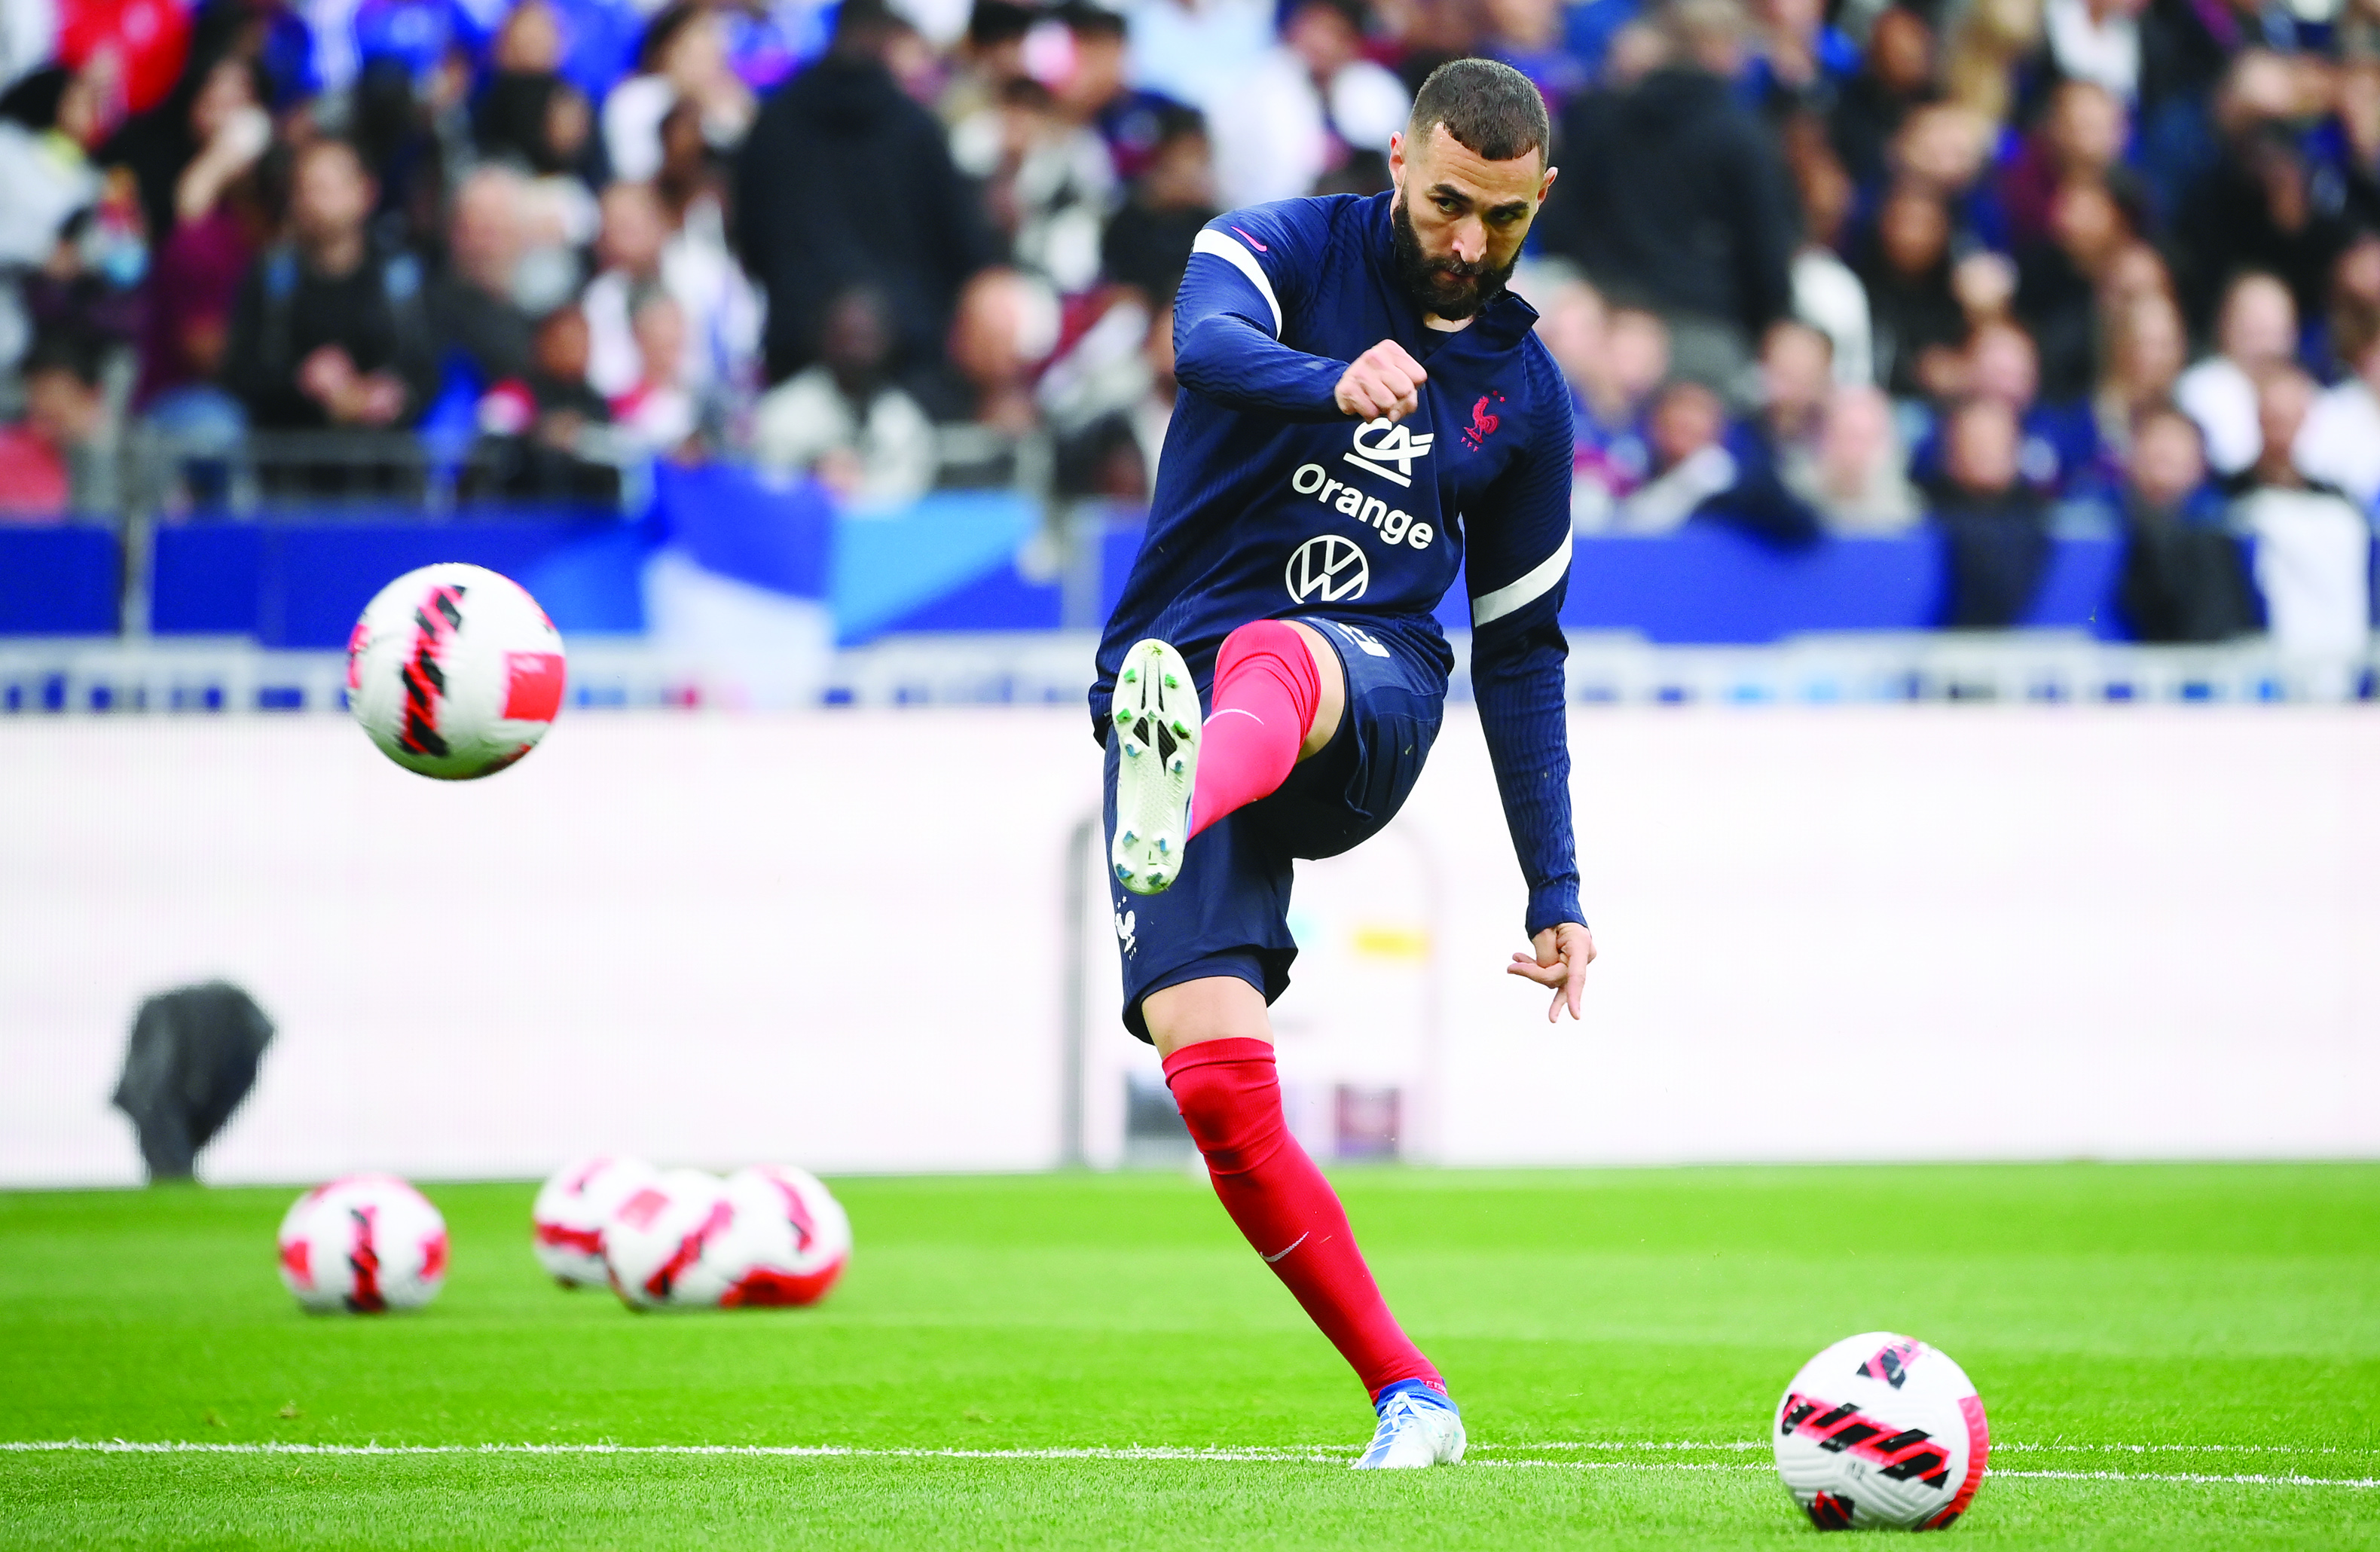 France's forward Karim Benzema warms up prior to the UEFA Nations League - League A Group 1 first leg football match between France and Denmark at the Stade de France in Saint-Denis, north of Paris, on June 3, 2022. (Photo by Franck FIFE / AFP)